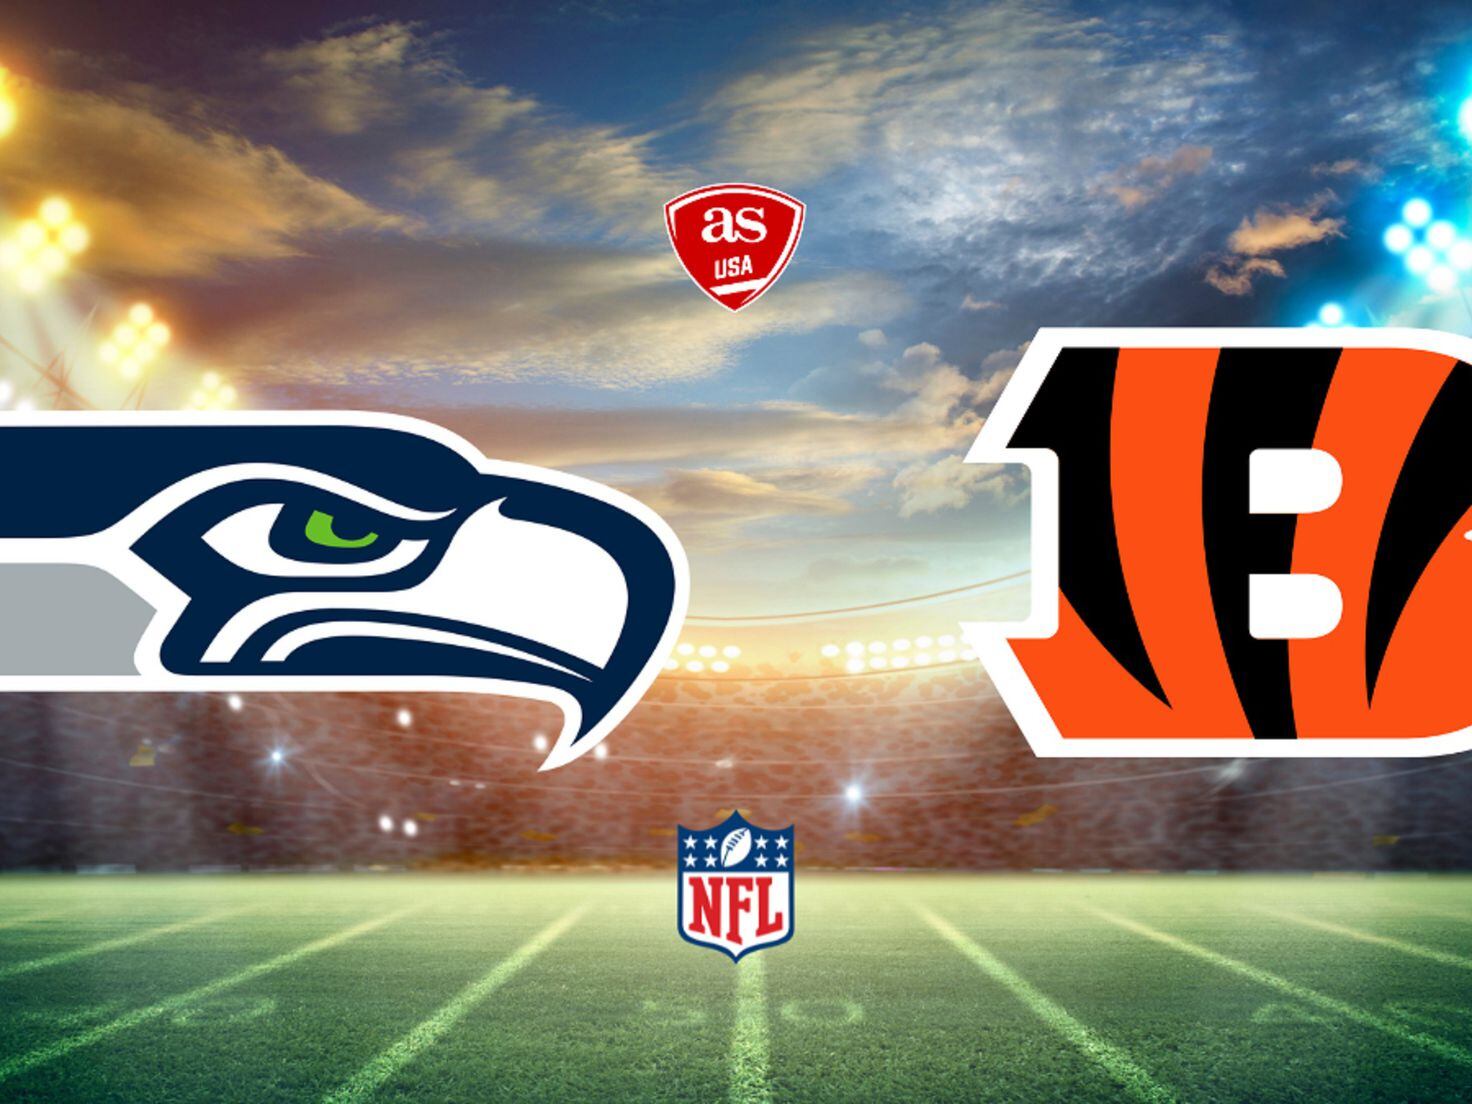 Seahawks vs Lions live stream: How to watch NFL week 2 online